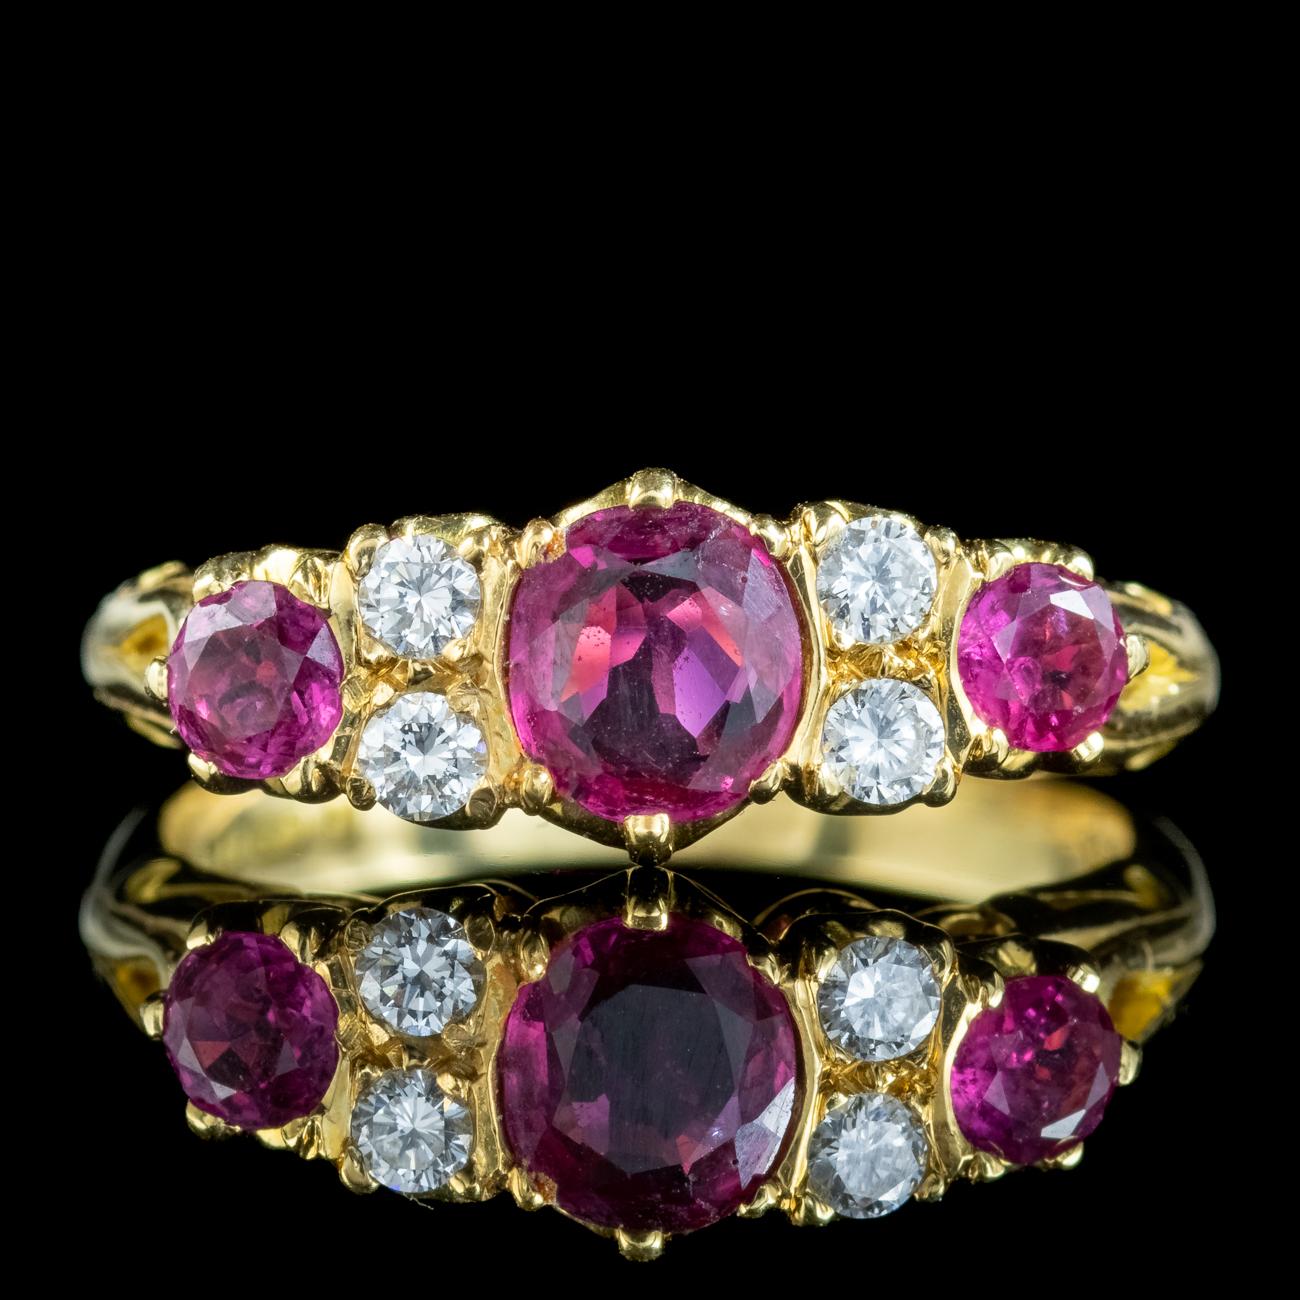 Brilliant Cut Vintage Ruby Diamond Ring 1.2ct Ruby Dated 1989 with Certificate For Sale